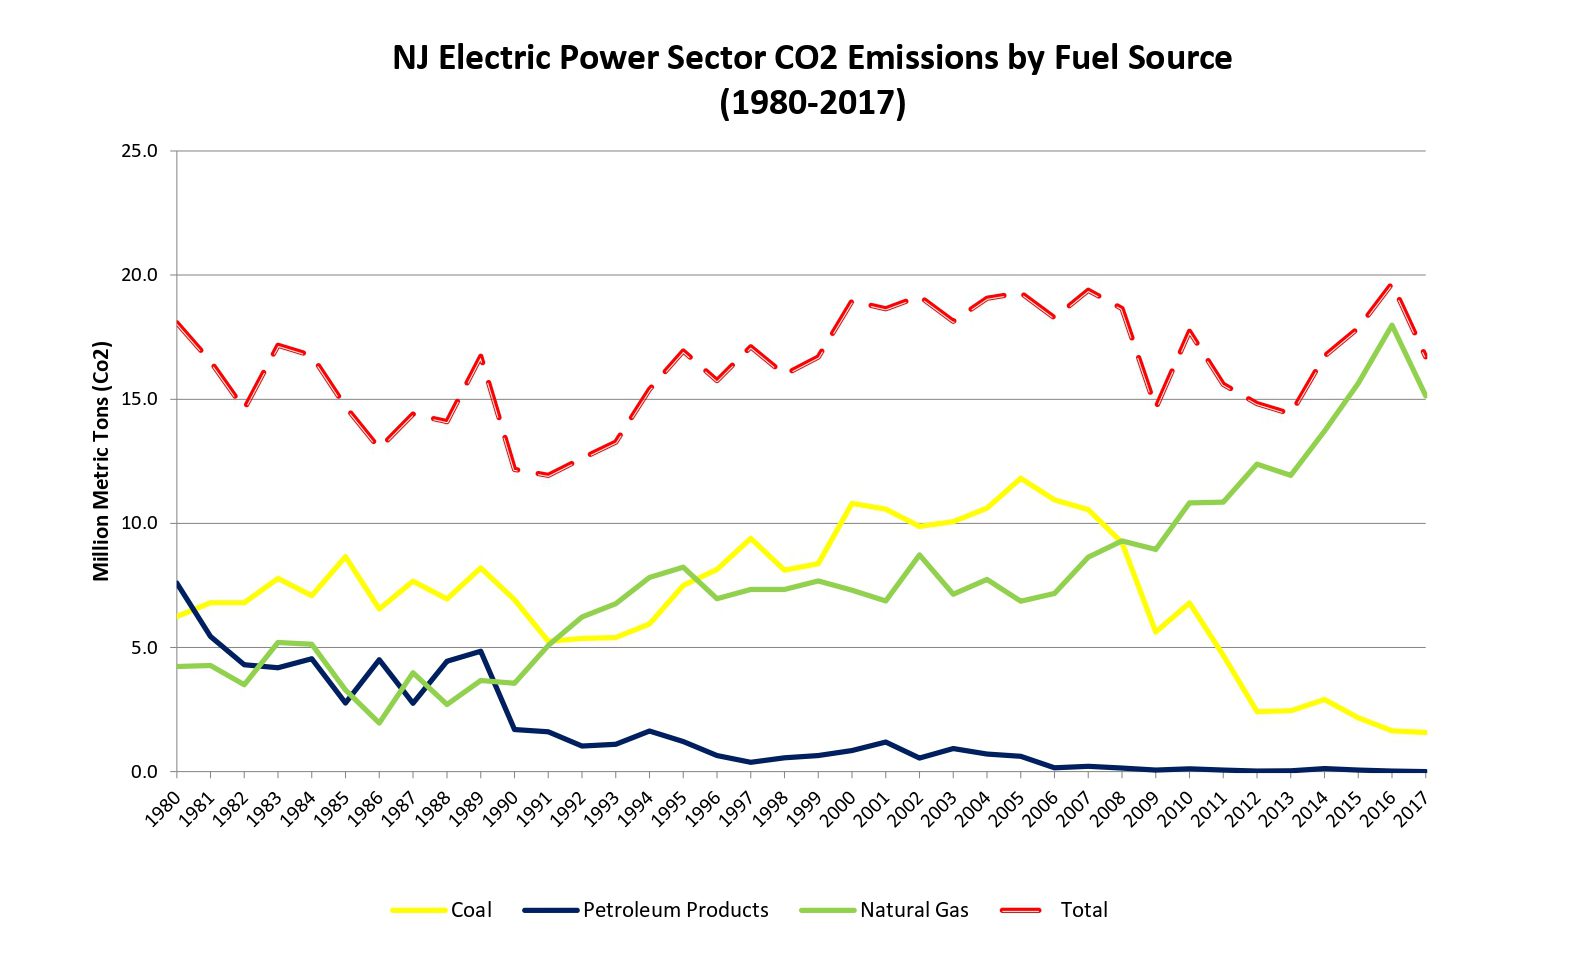 Electric Power Sector CO2 Emission Data